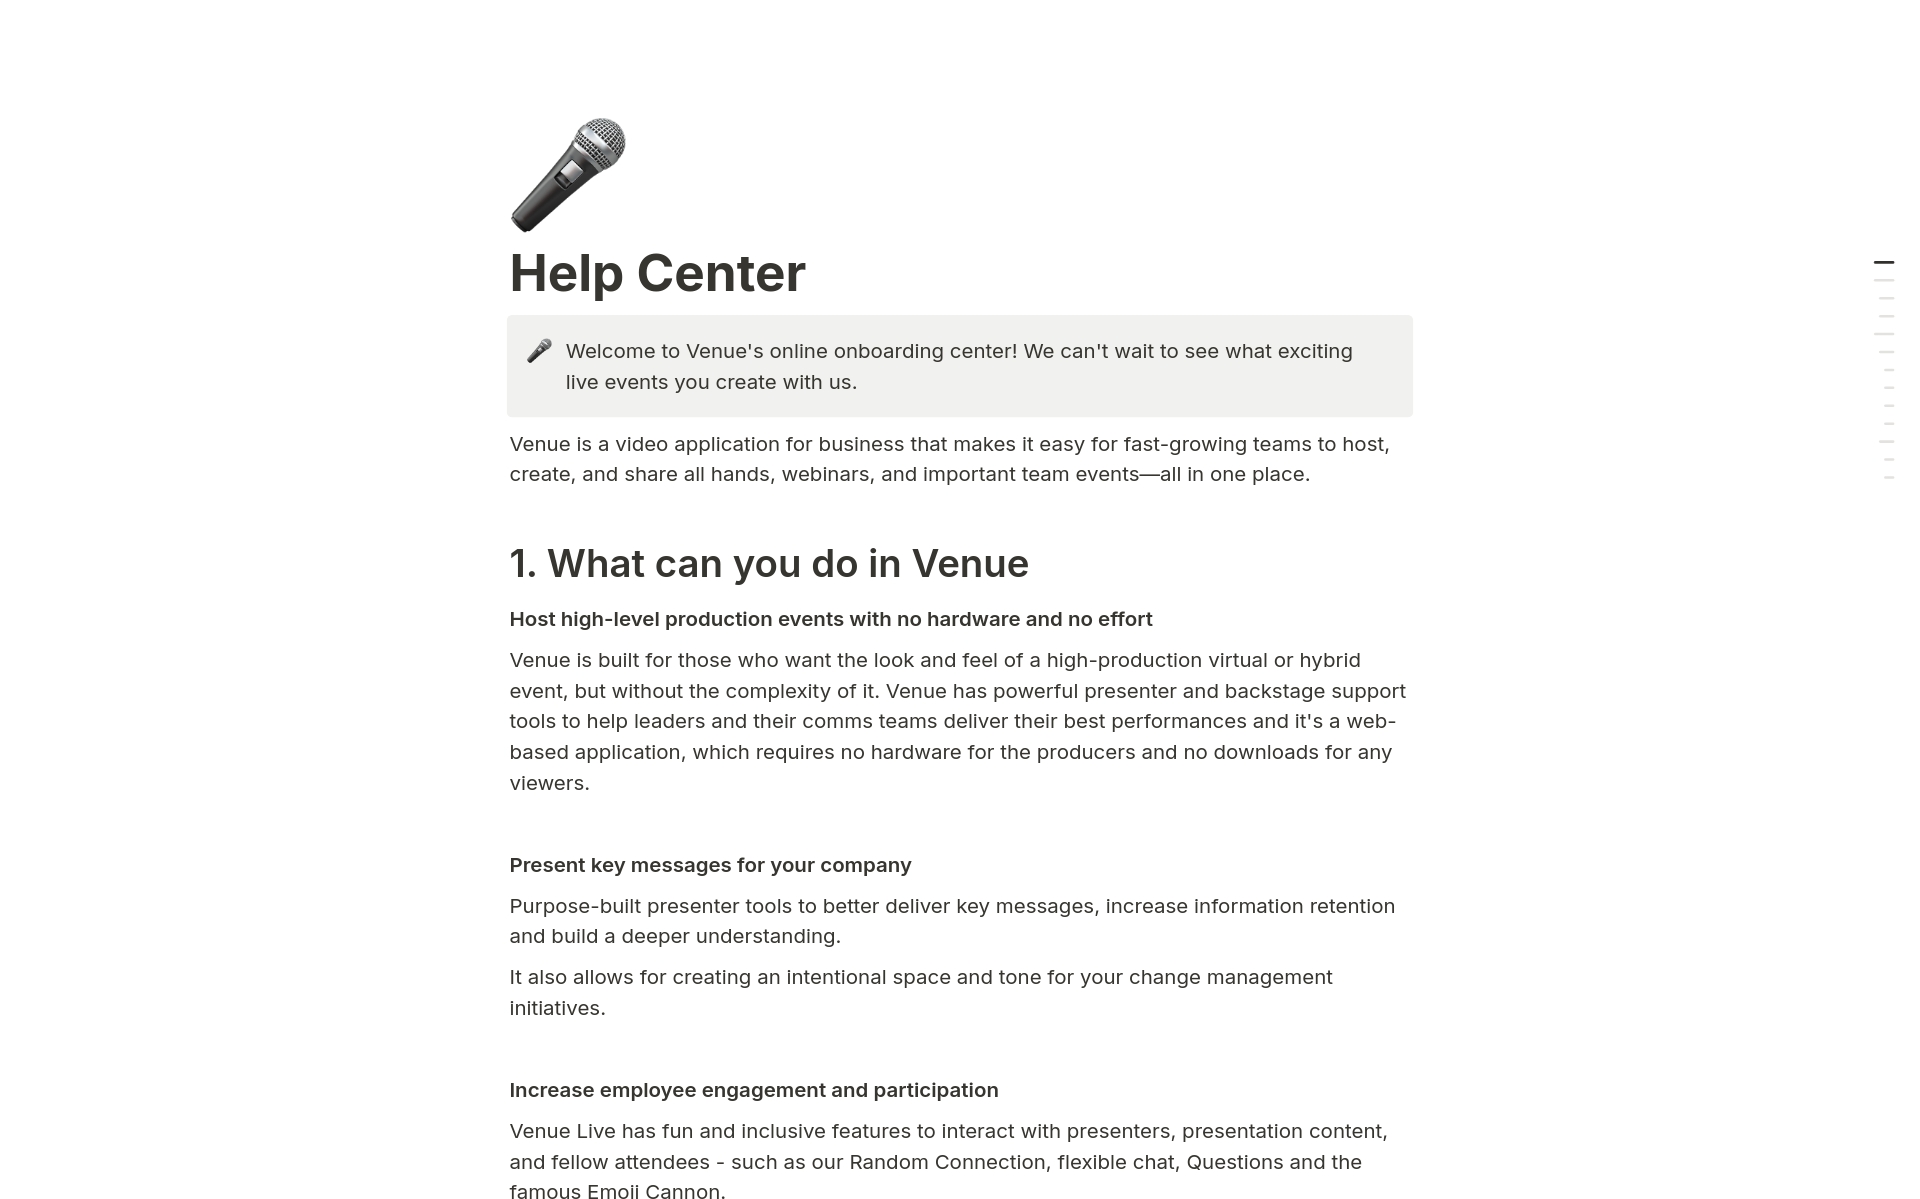 How Venue uses Notion to host their help center.